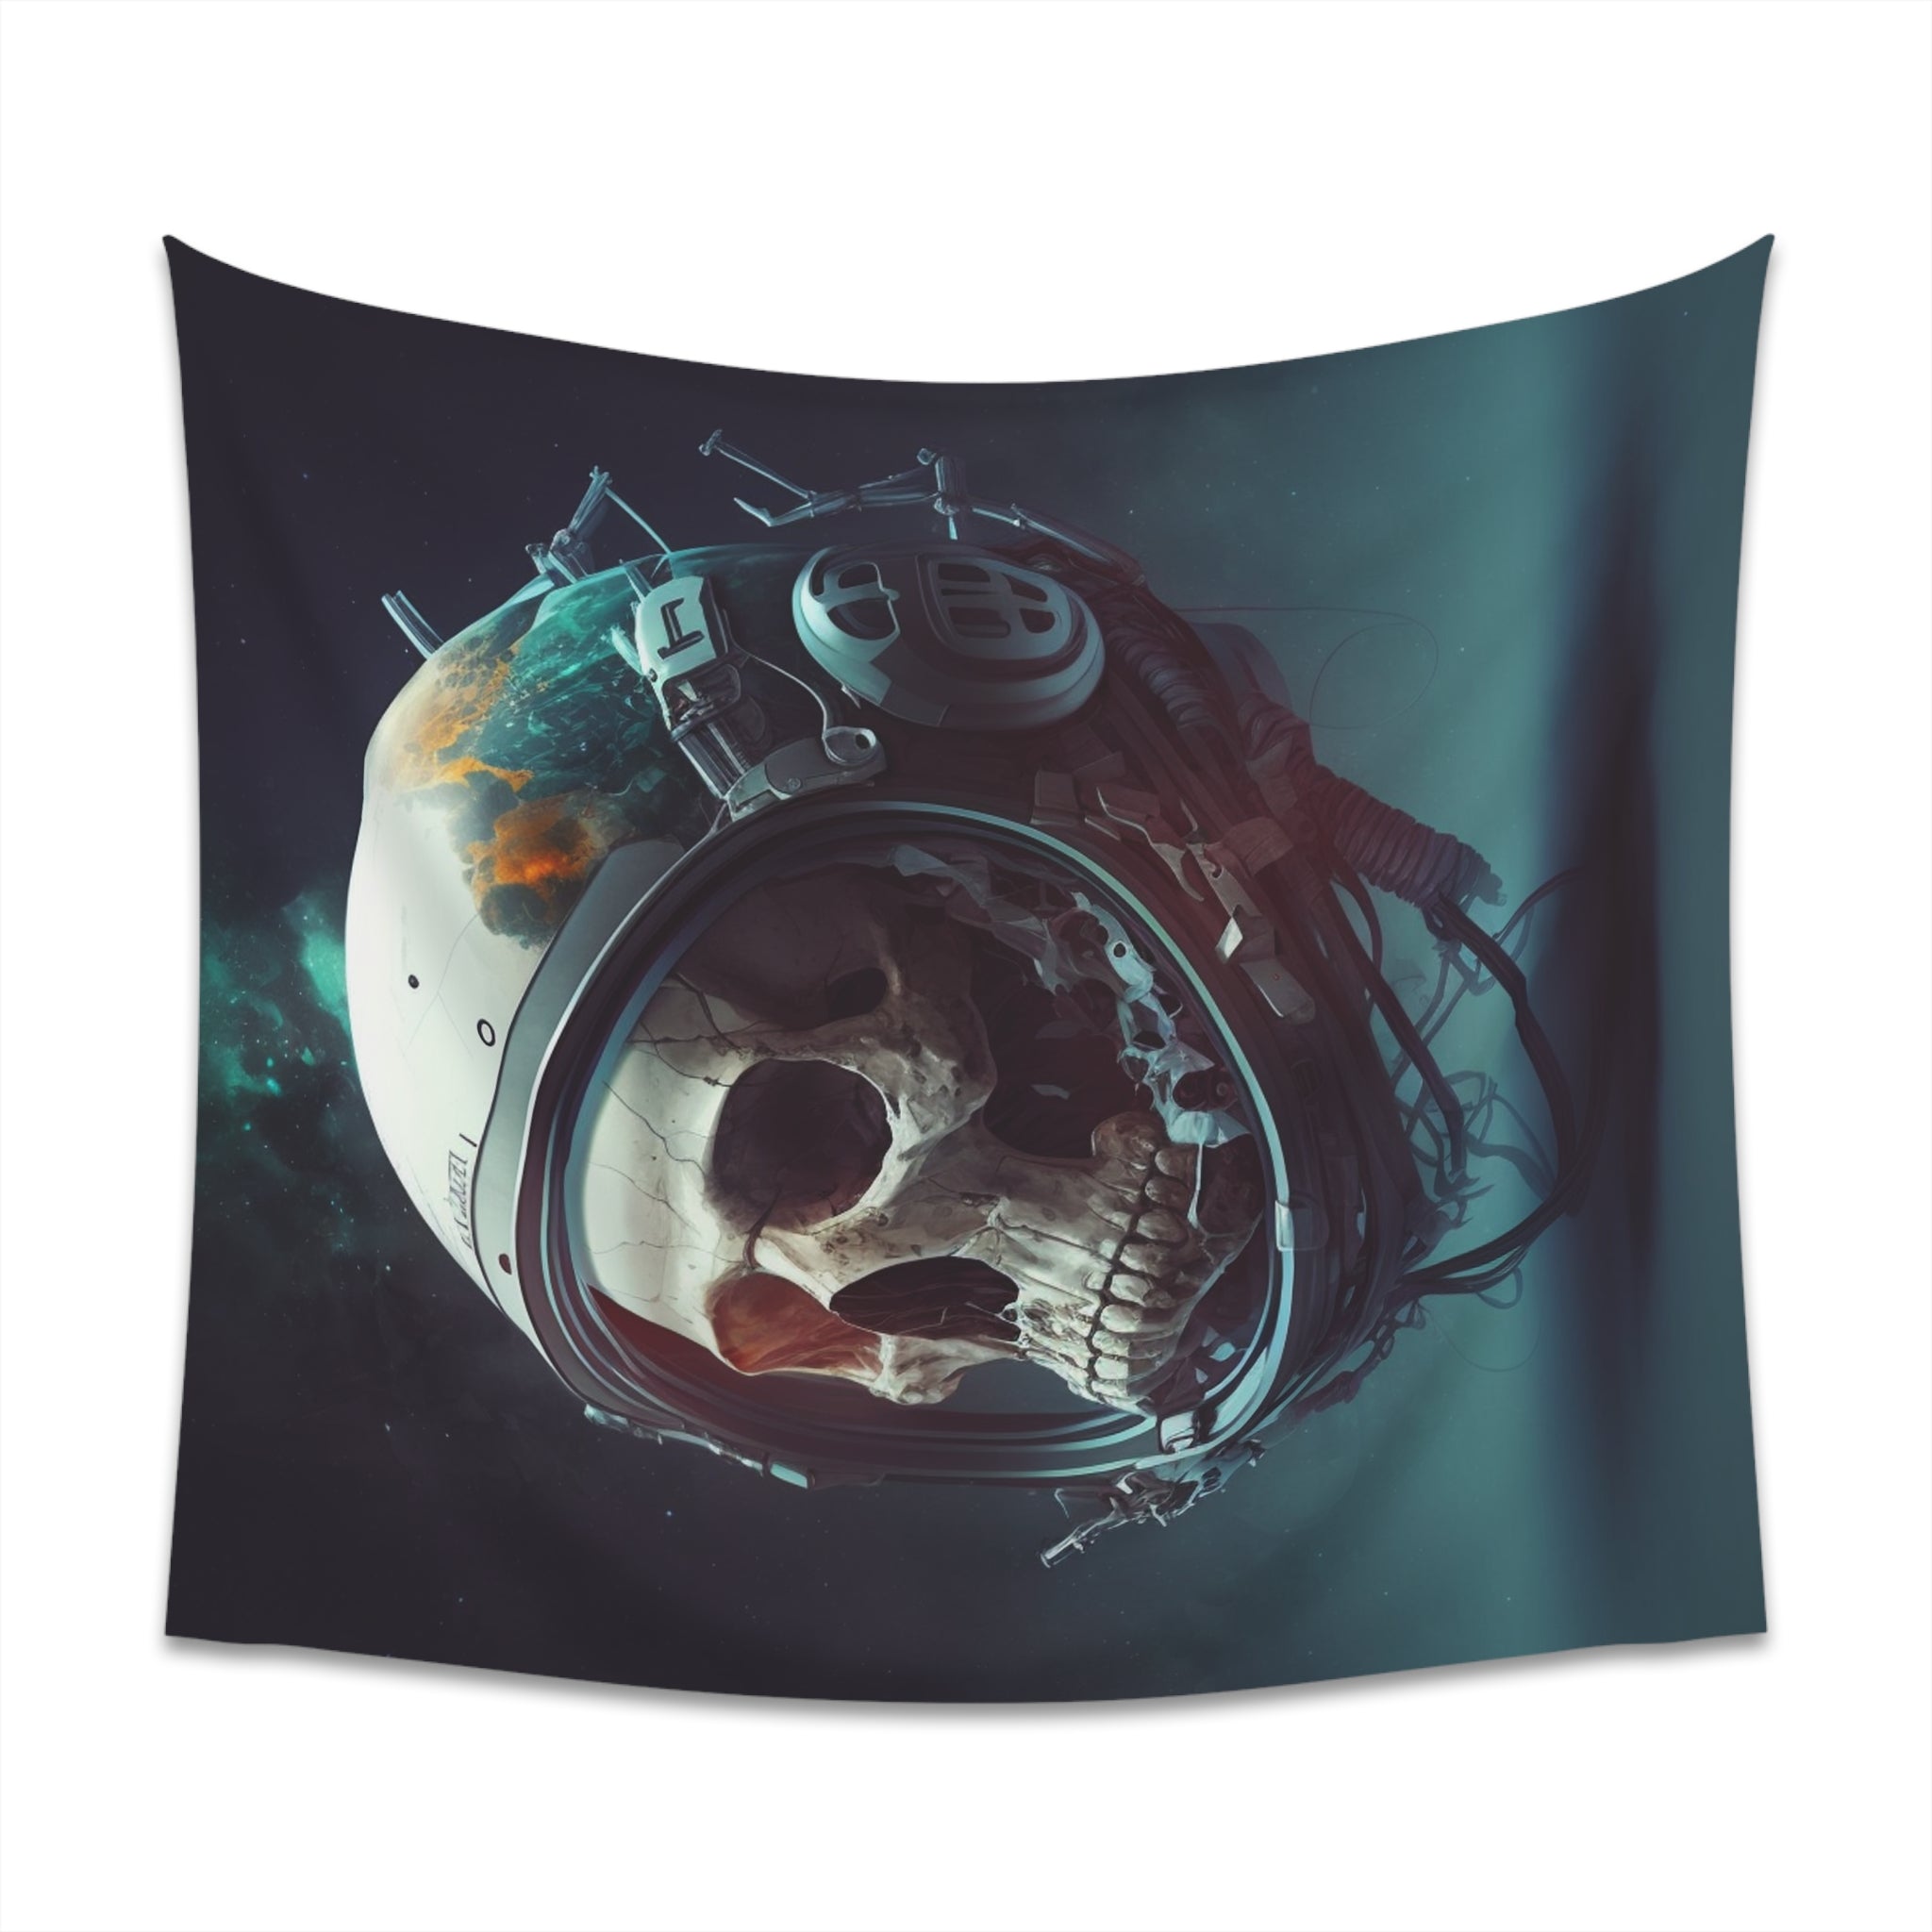 Undead Astronaut Space Man Skull Space Art Printed Wall Tapestry Sci Fi Psychedelic Tapestries